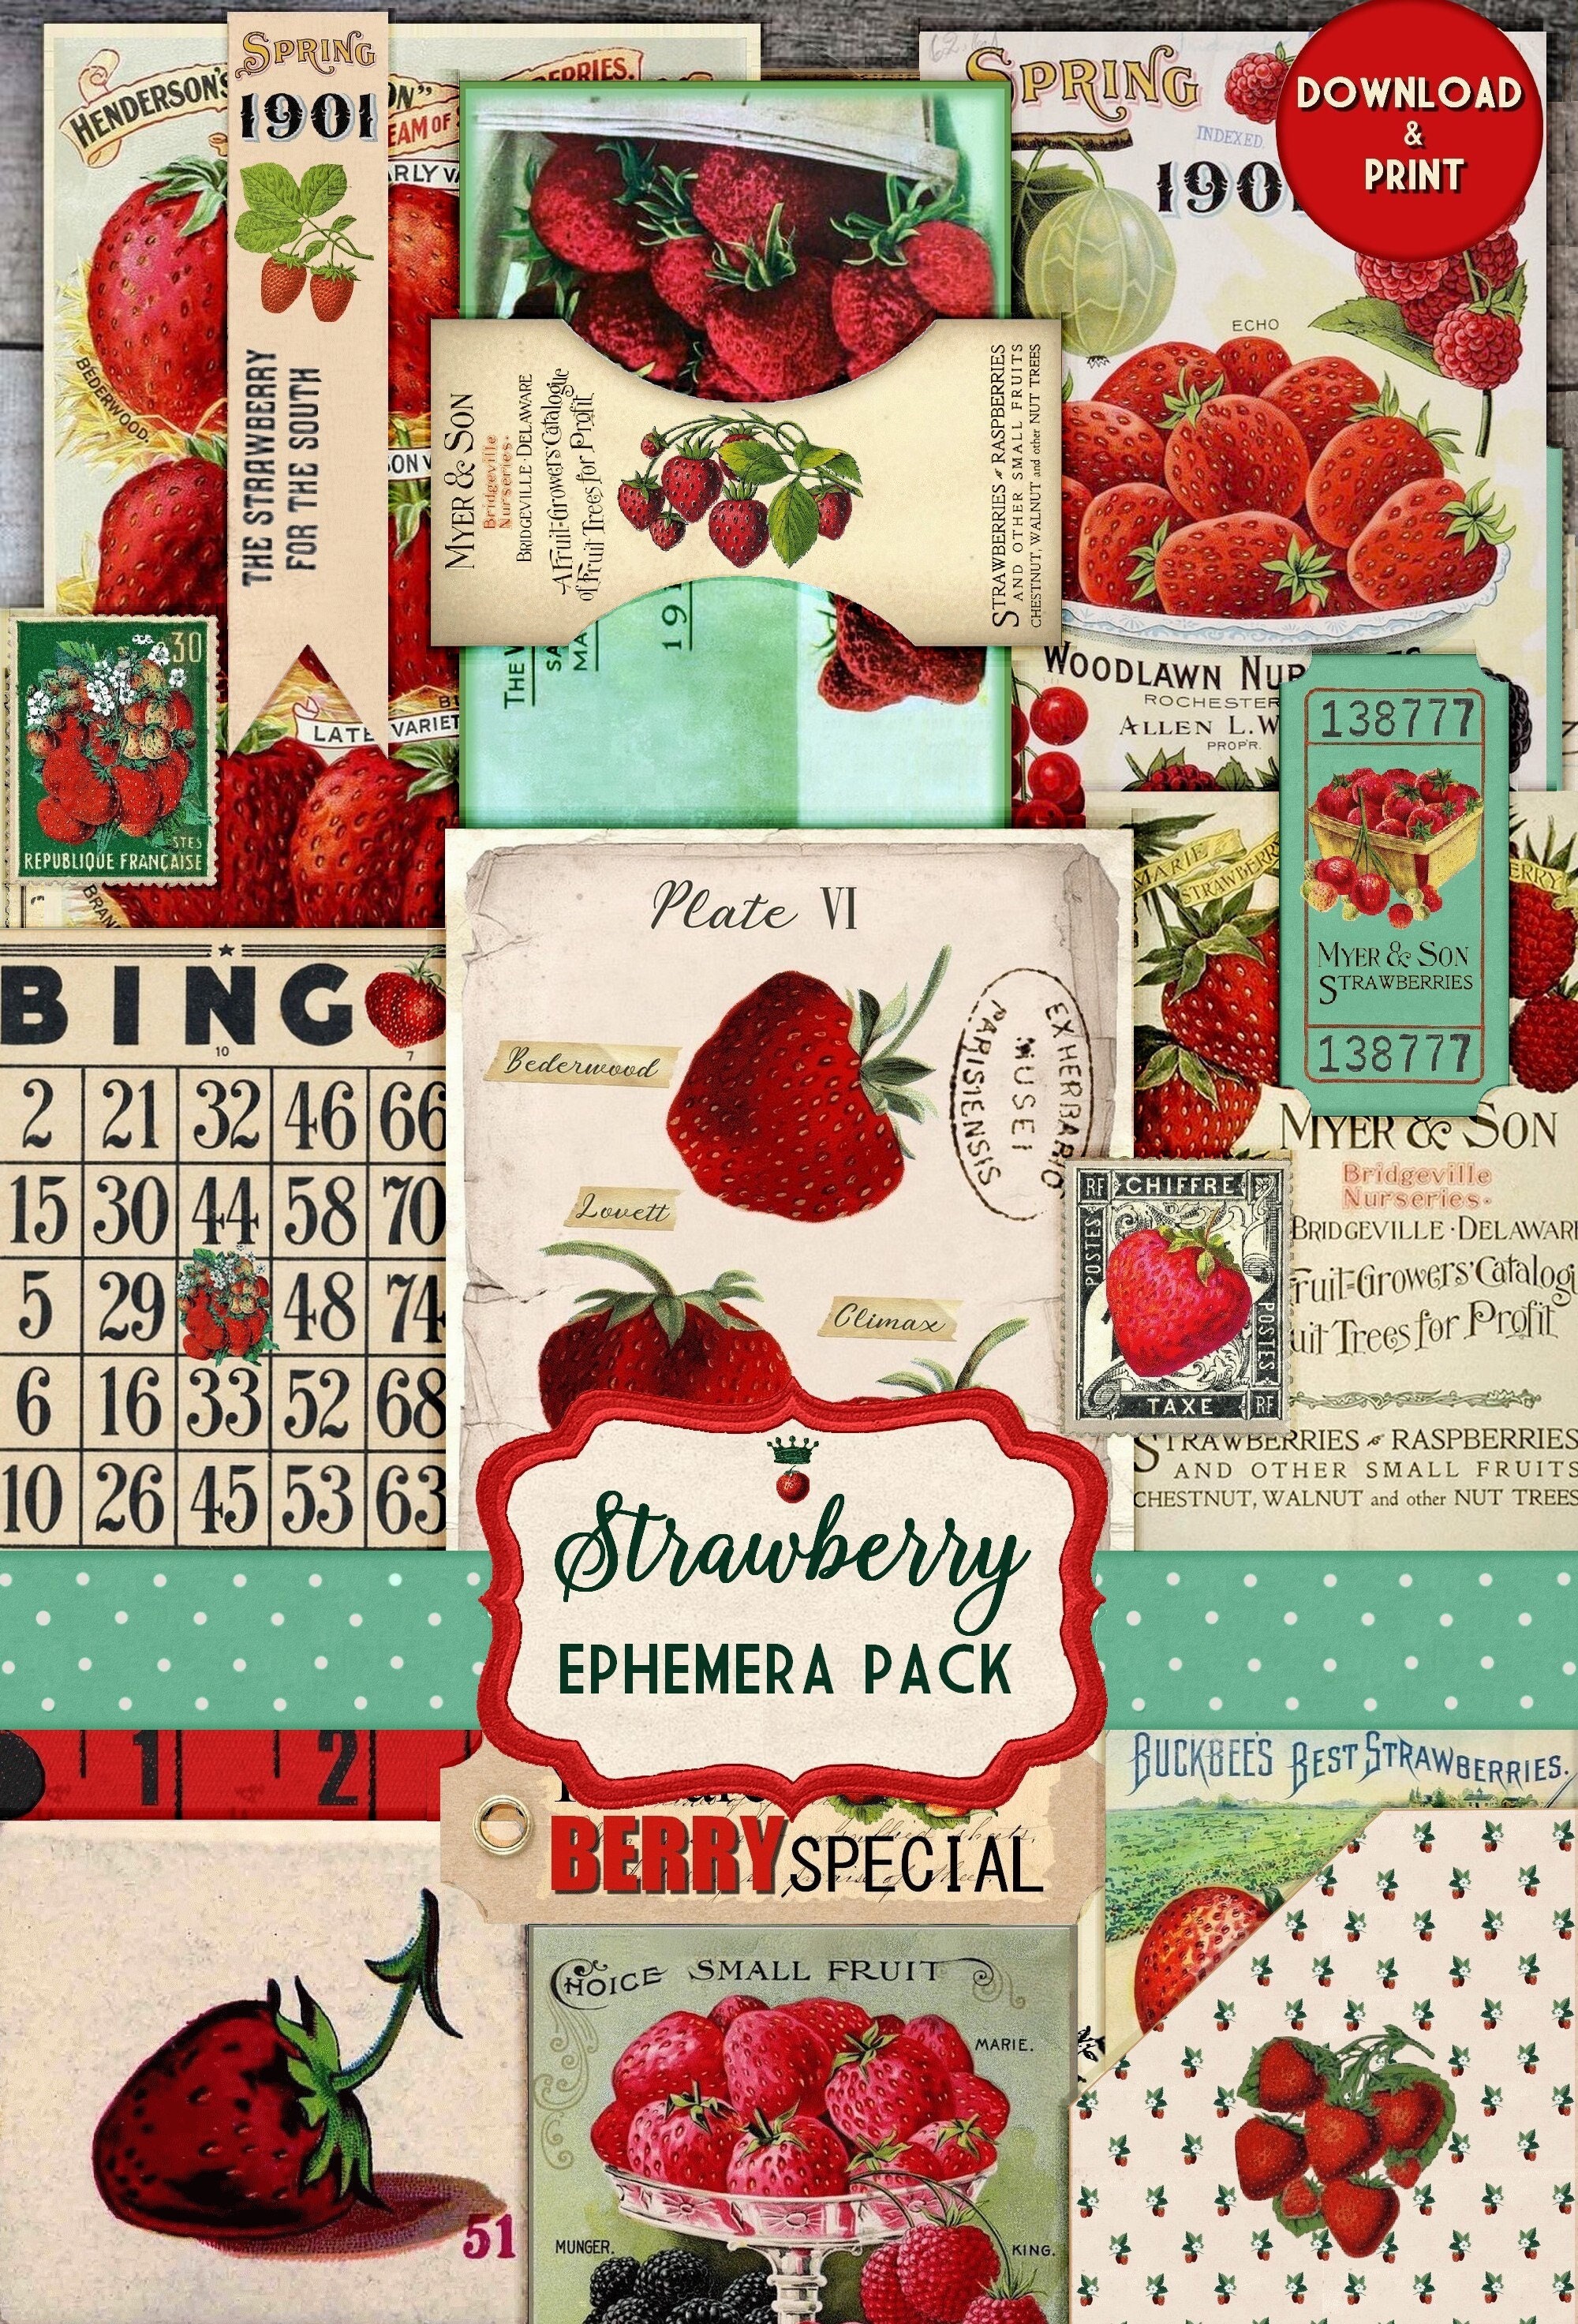 Strawberries Gift Wrap With Tag of Strawberries and Insects